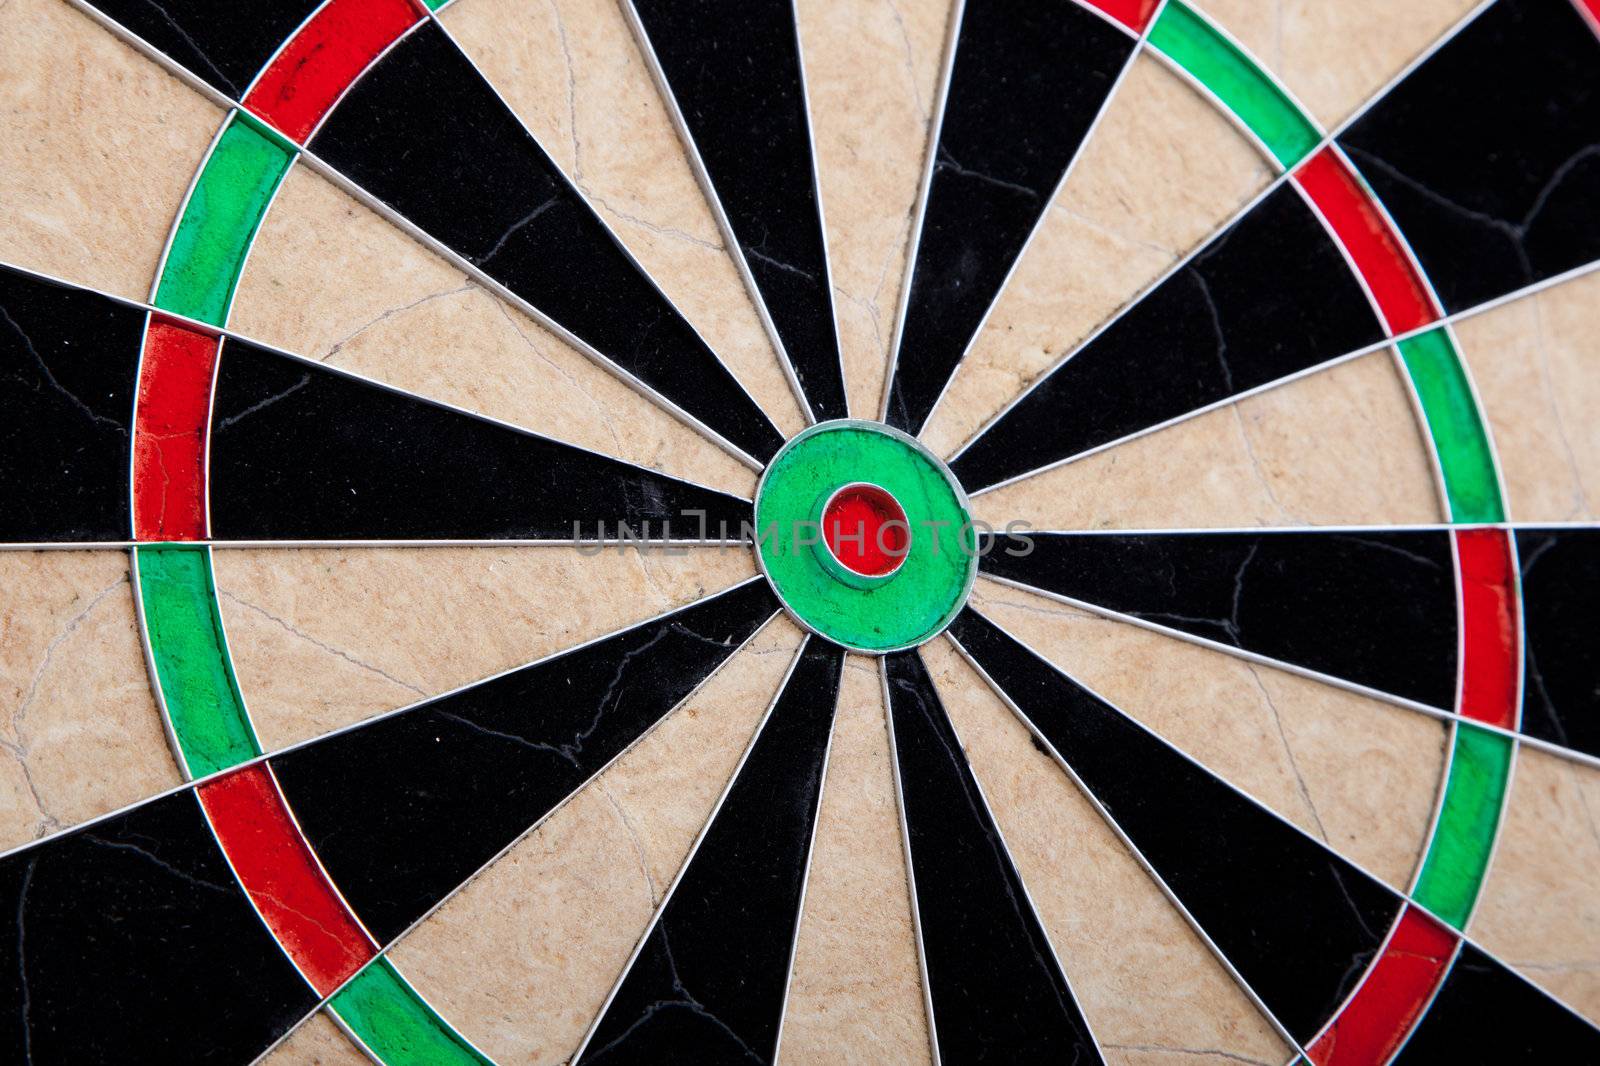 Perspective Of Cracked Darts Board by nfx702